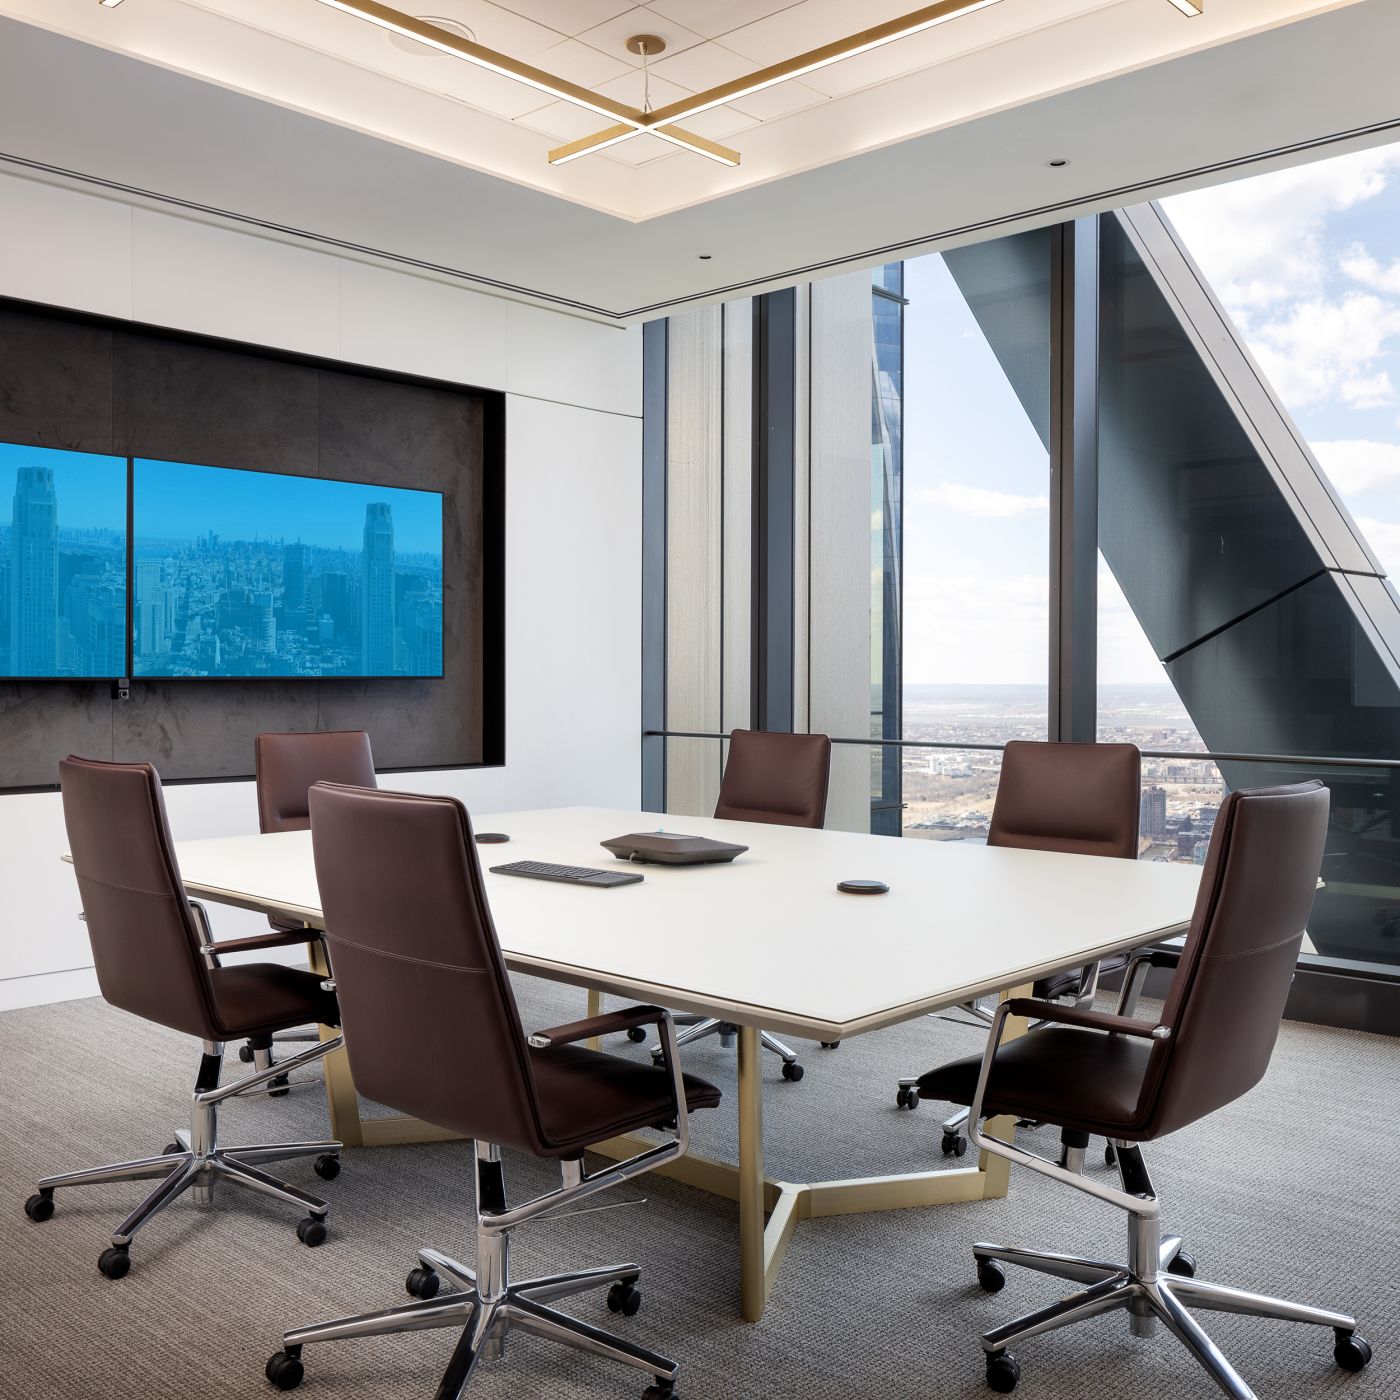 A HALO conference table features an etched glass surface with patented HALO soft edge and Brushed Brass base.